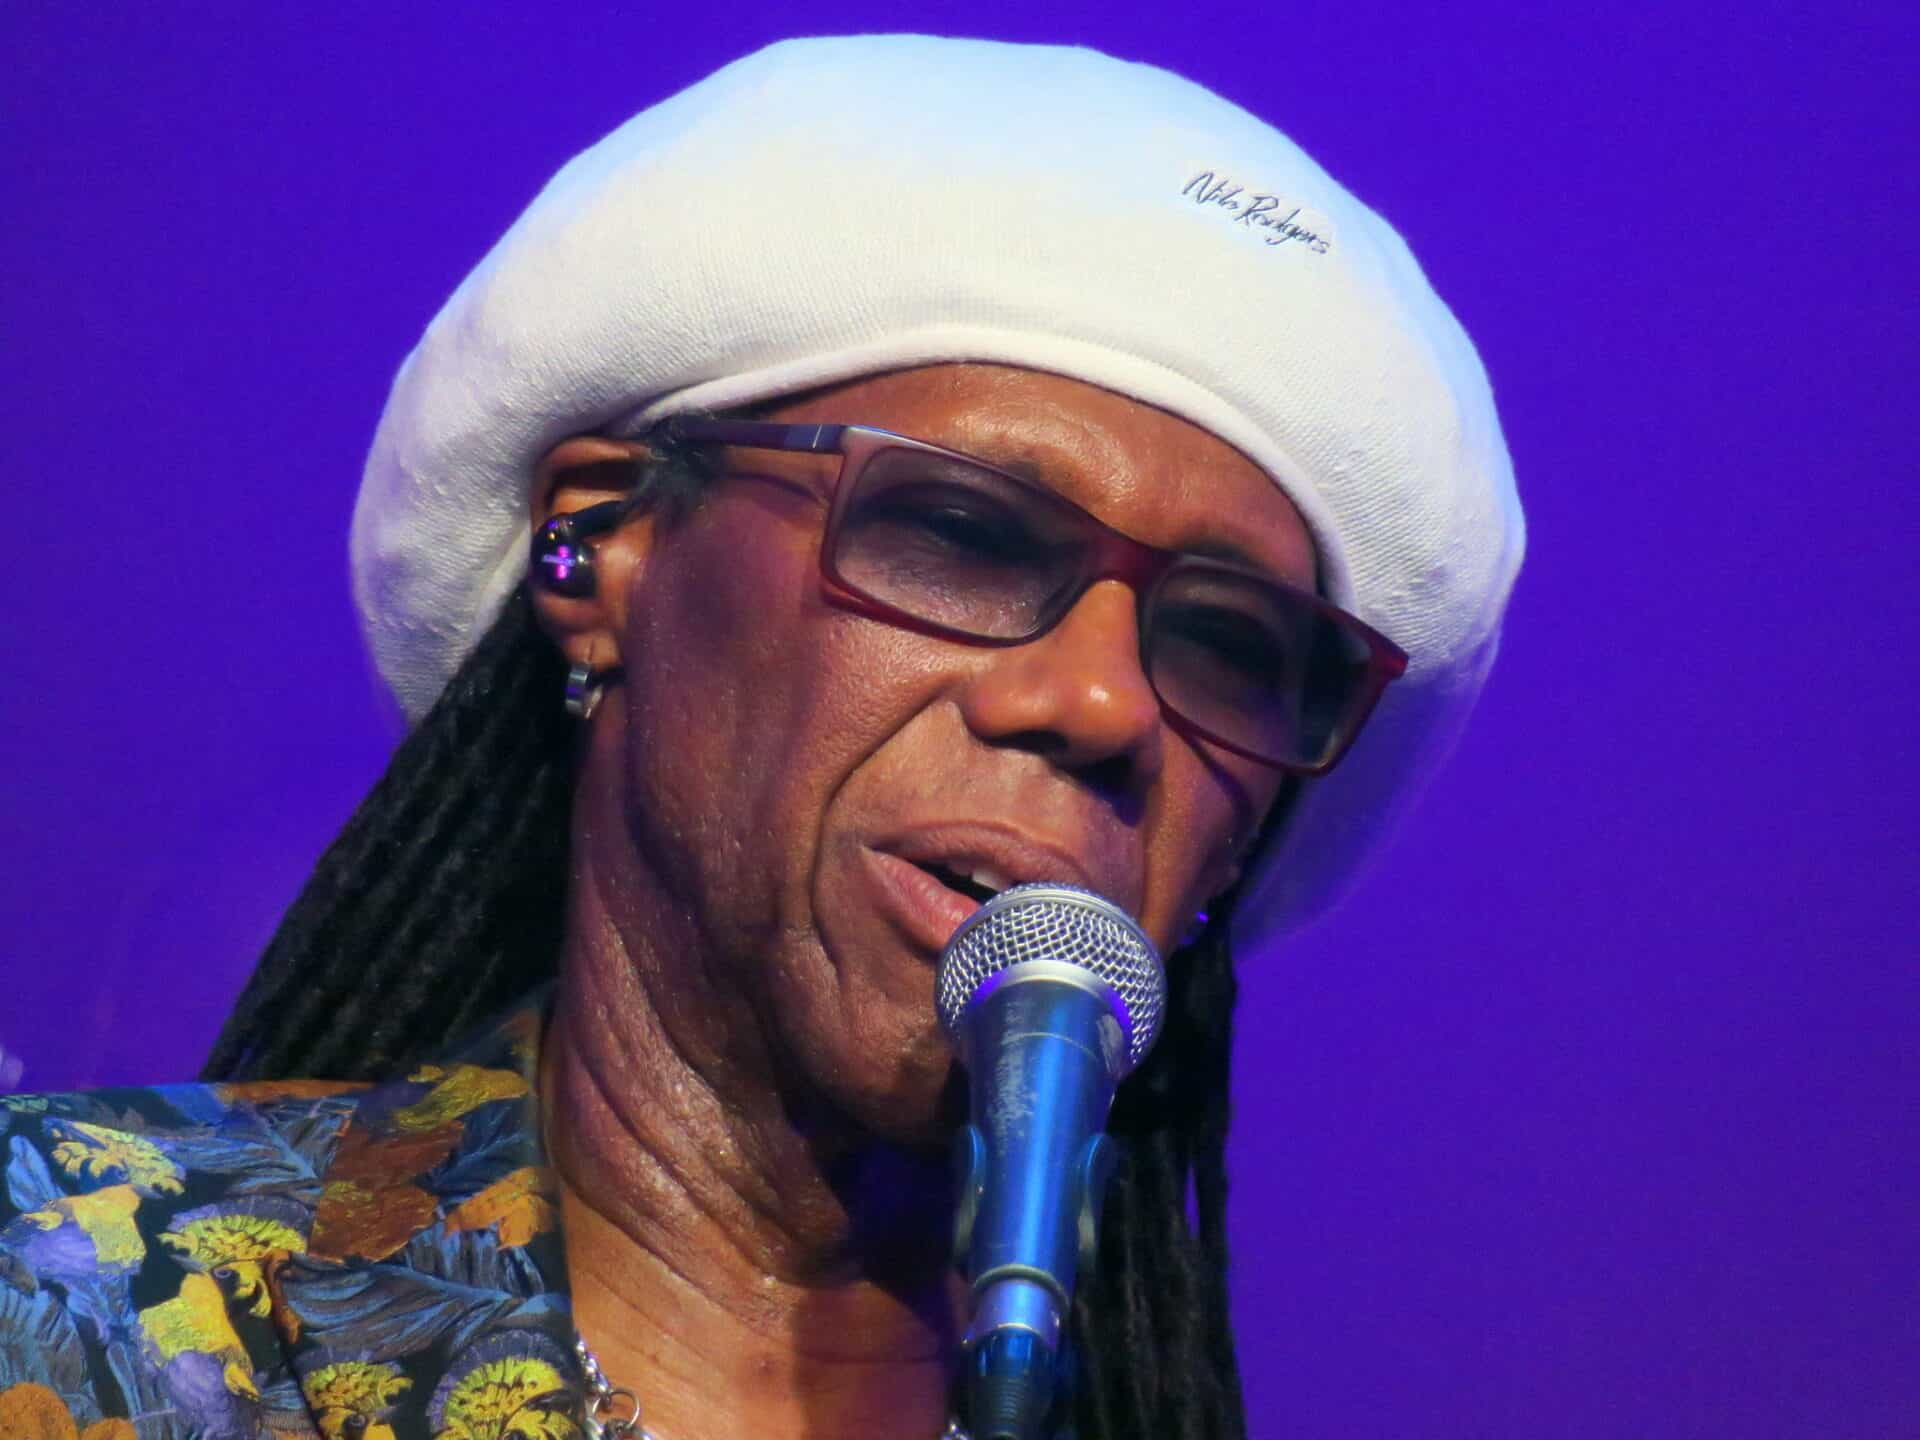 Nile Rodgers at concert